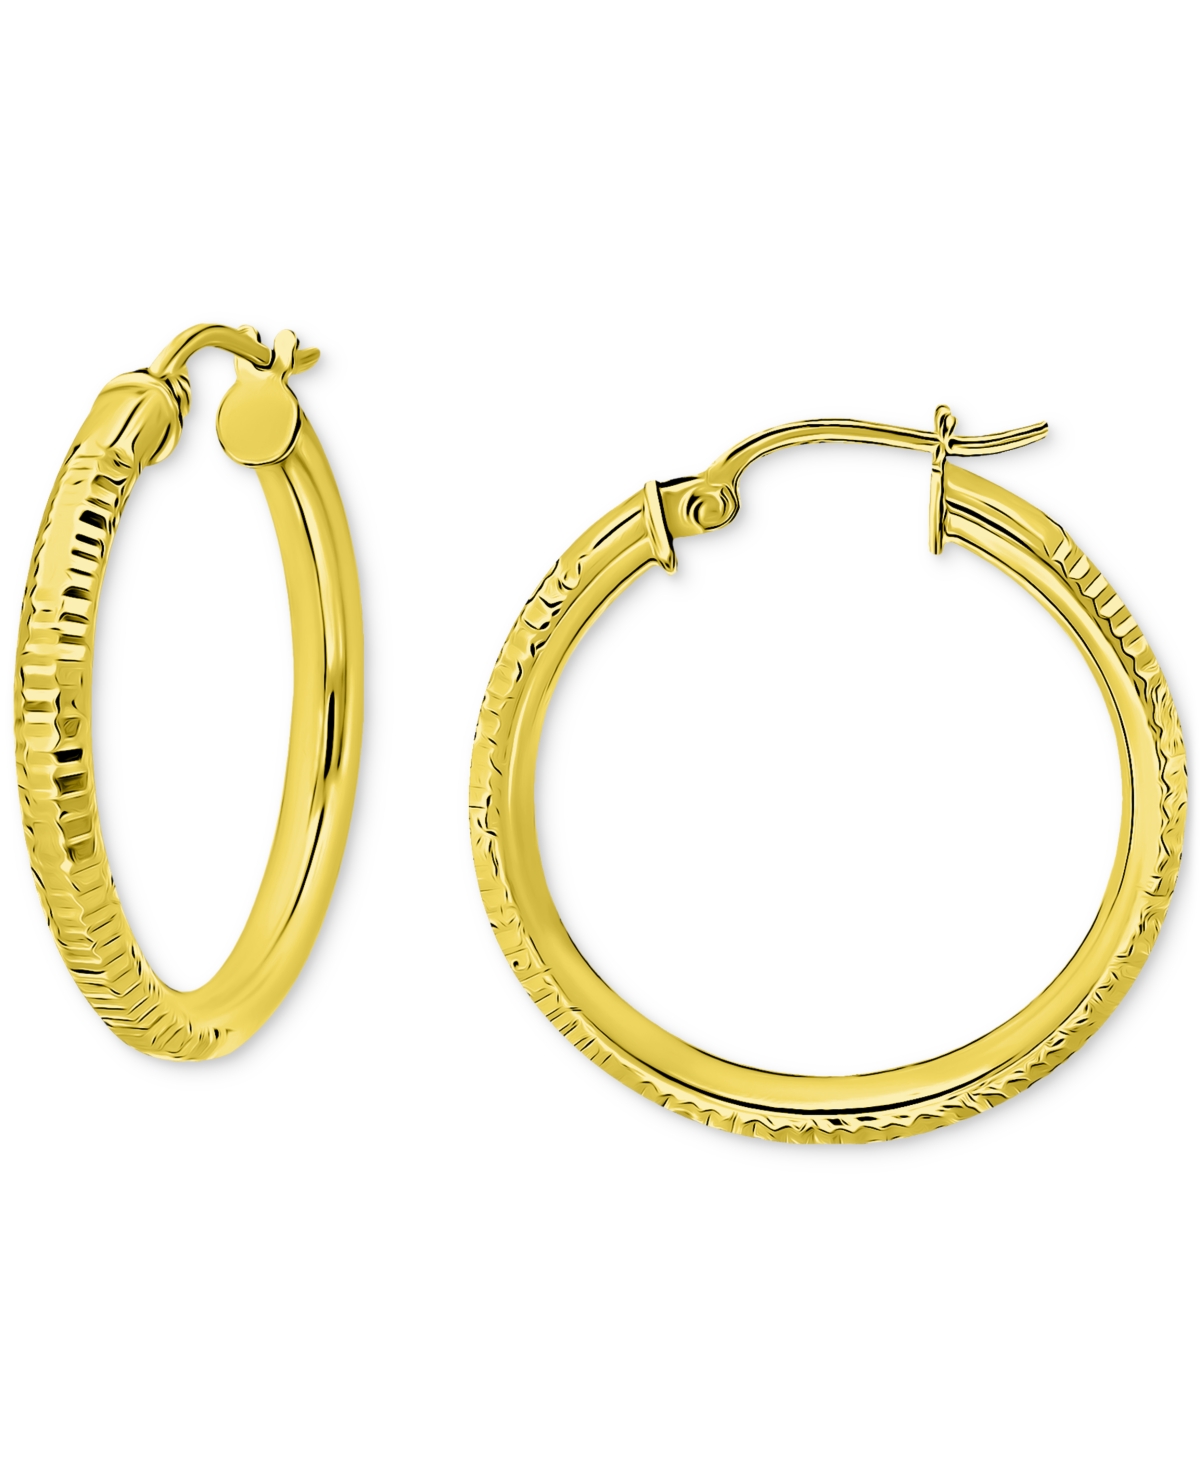 Giani Bernini Ridged Tube Small Hoop Earrings In 18k Gold-plated Sterling Silver, 25mm, Created For Macy's